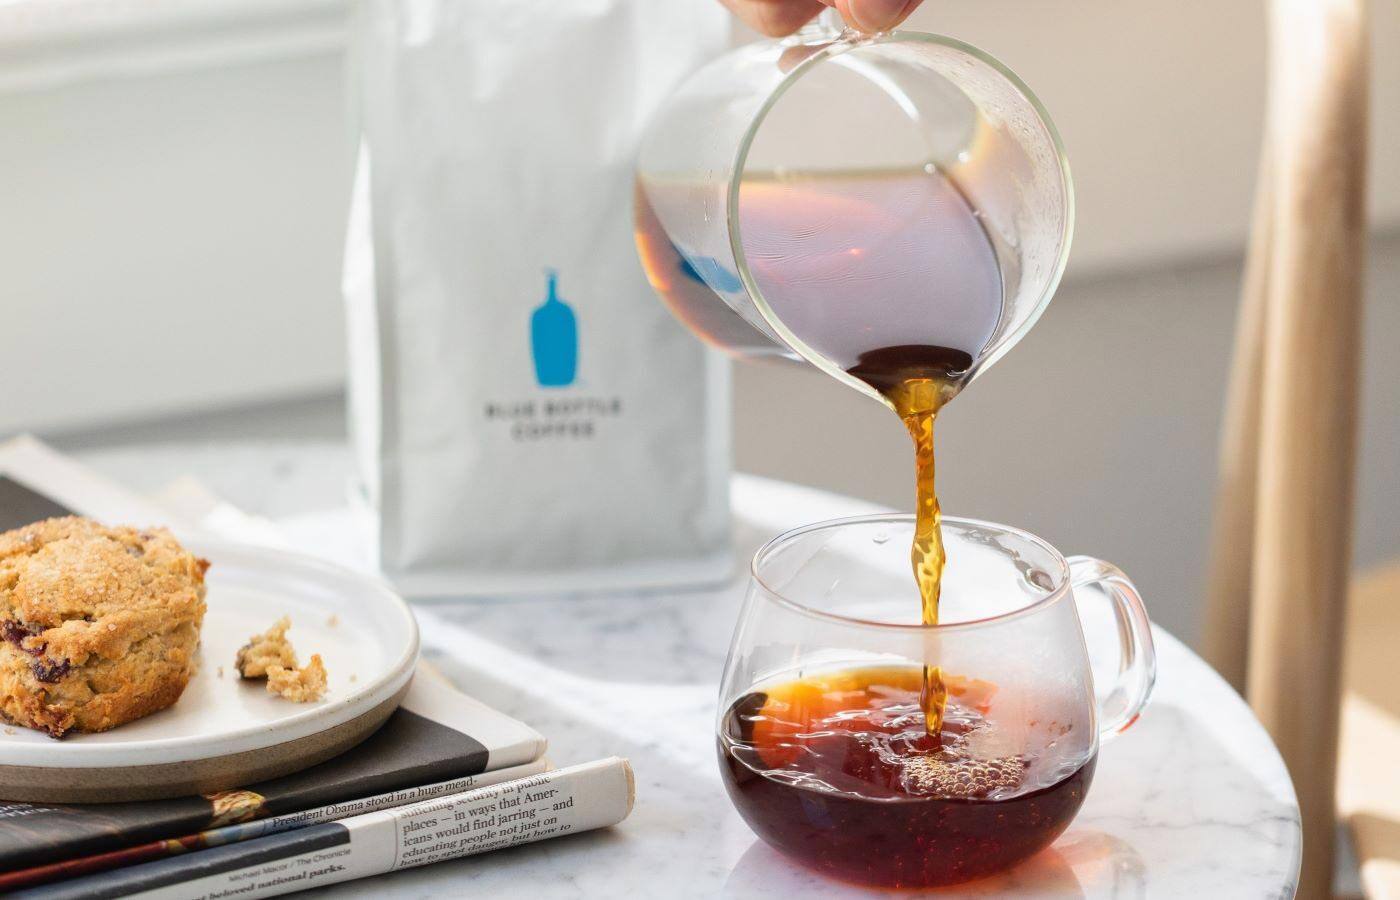 Blue Bottle Coffee - Rakuten coupons and Cash Back